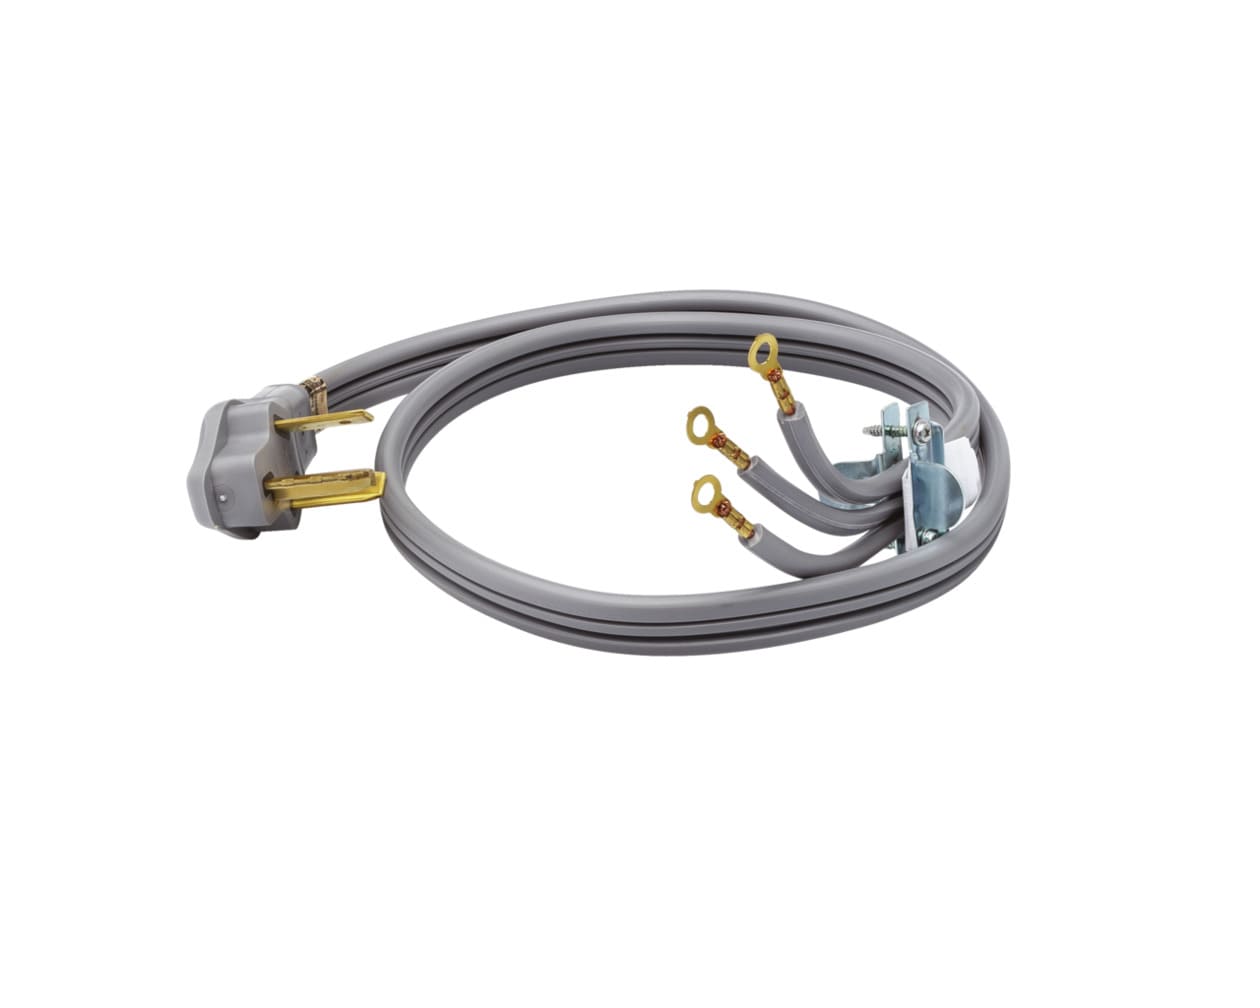 Frigidaire Smart Choice 4' 30 Amp 3 Wire Dryer Cord